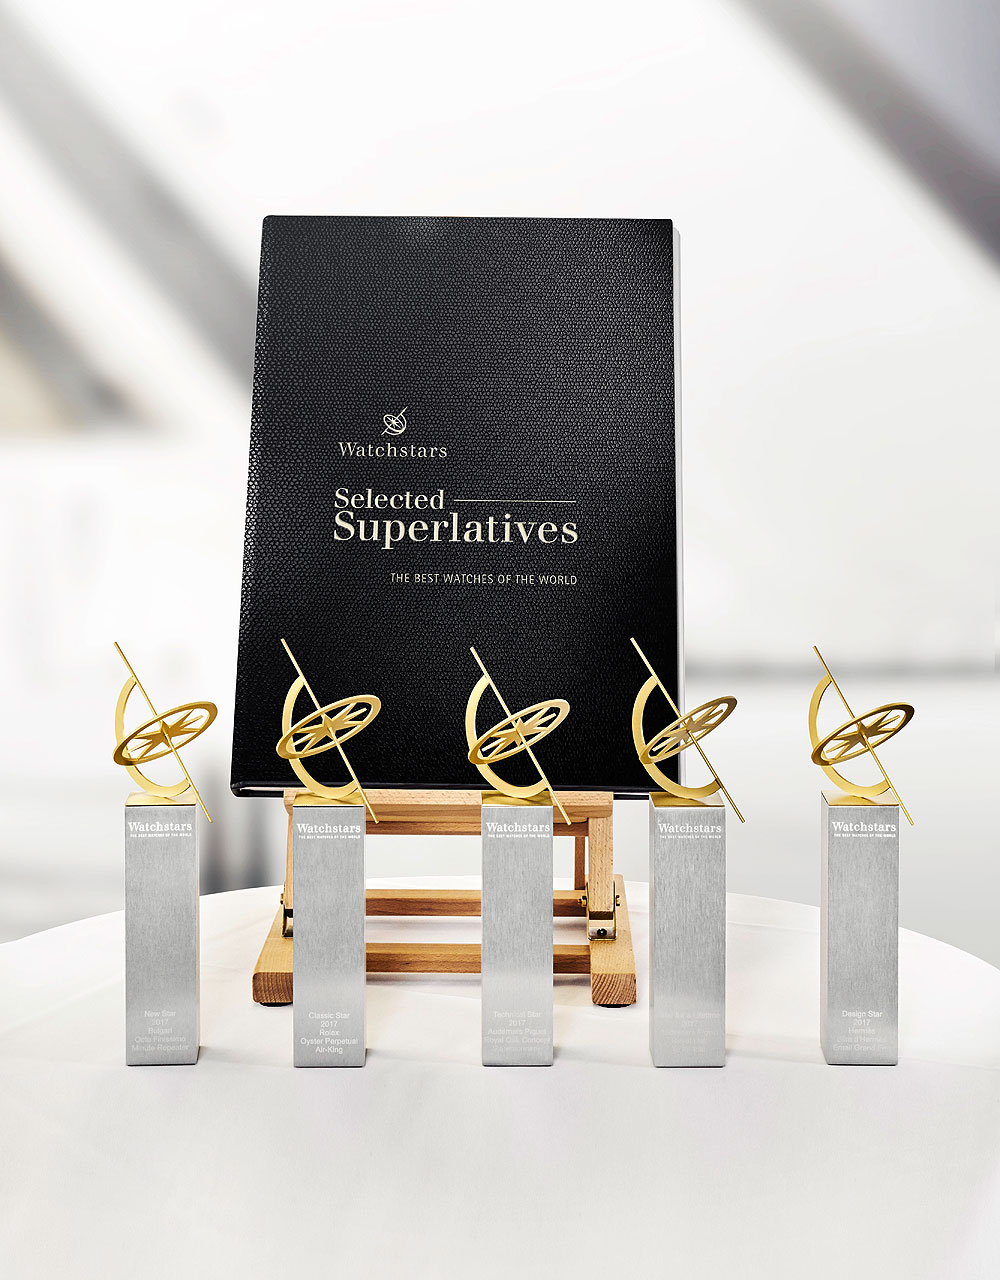 Selected Superlatives: The New Watchstars Book, Available Now for Pre-Order